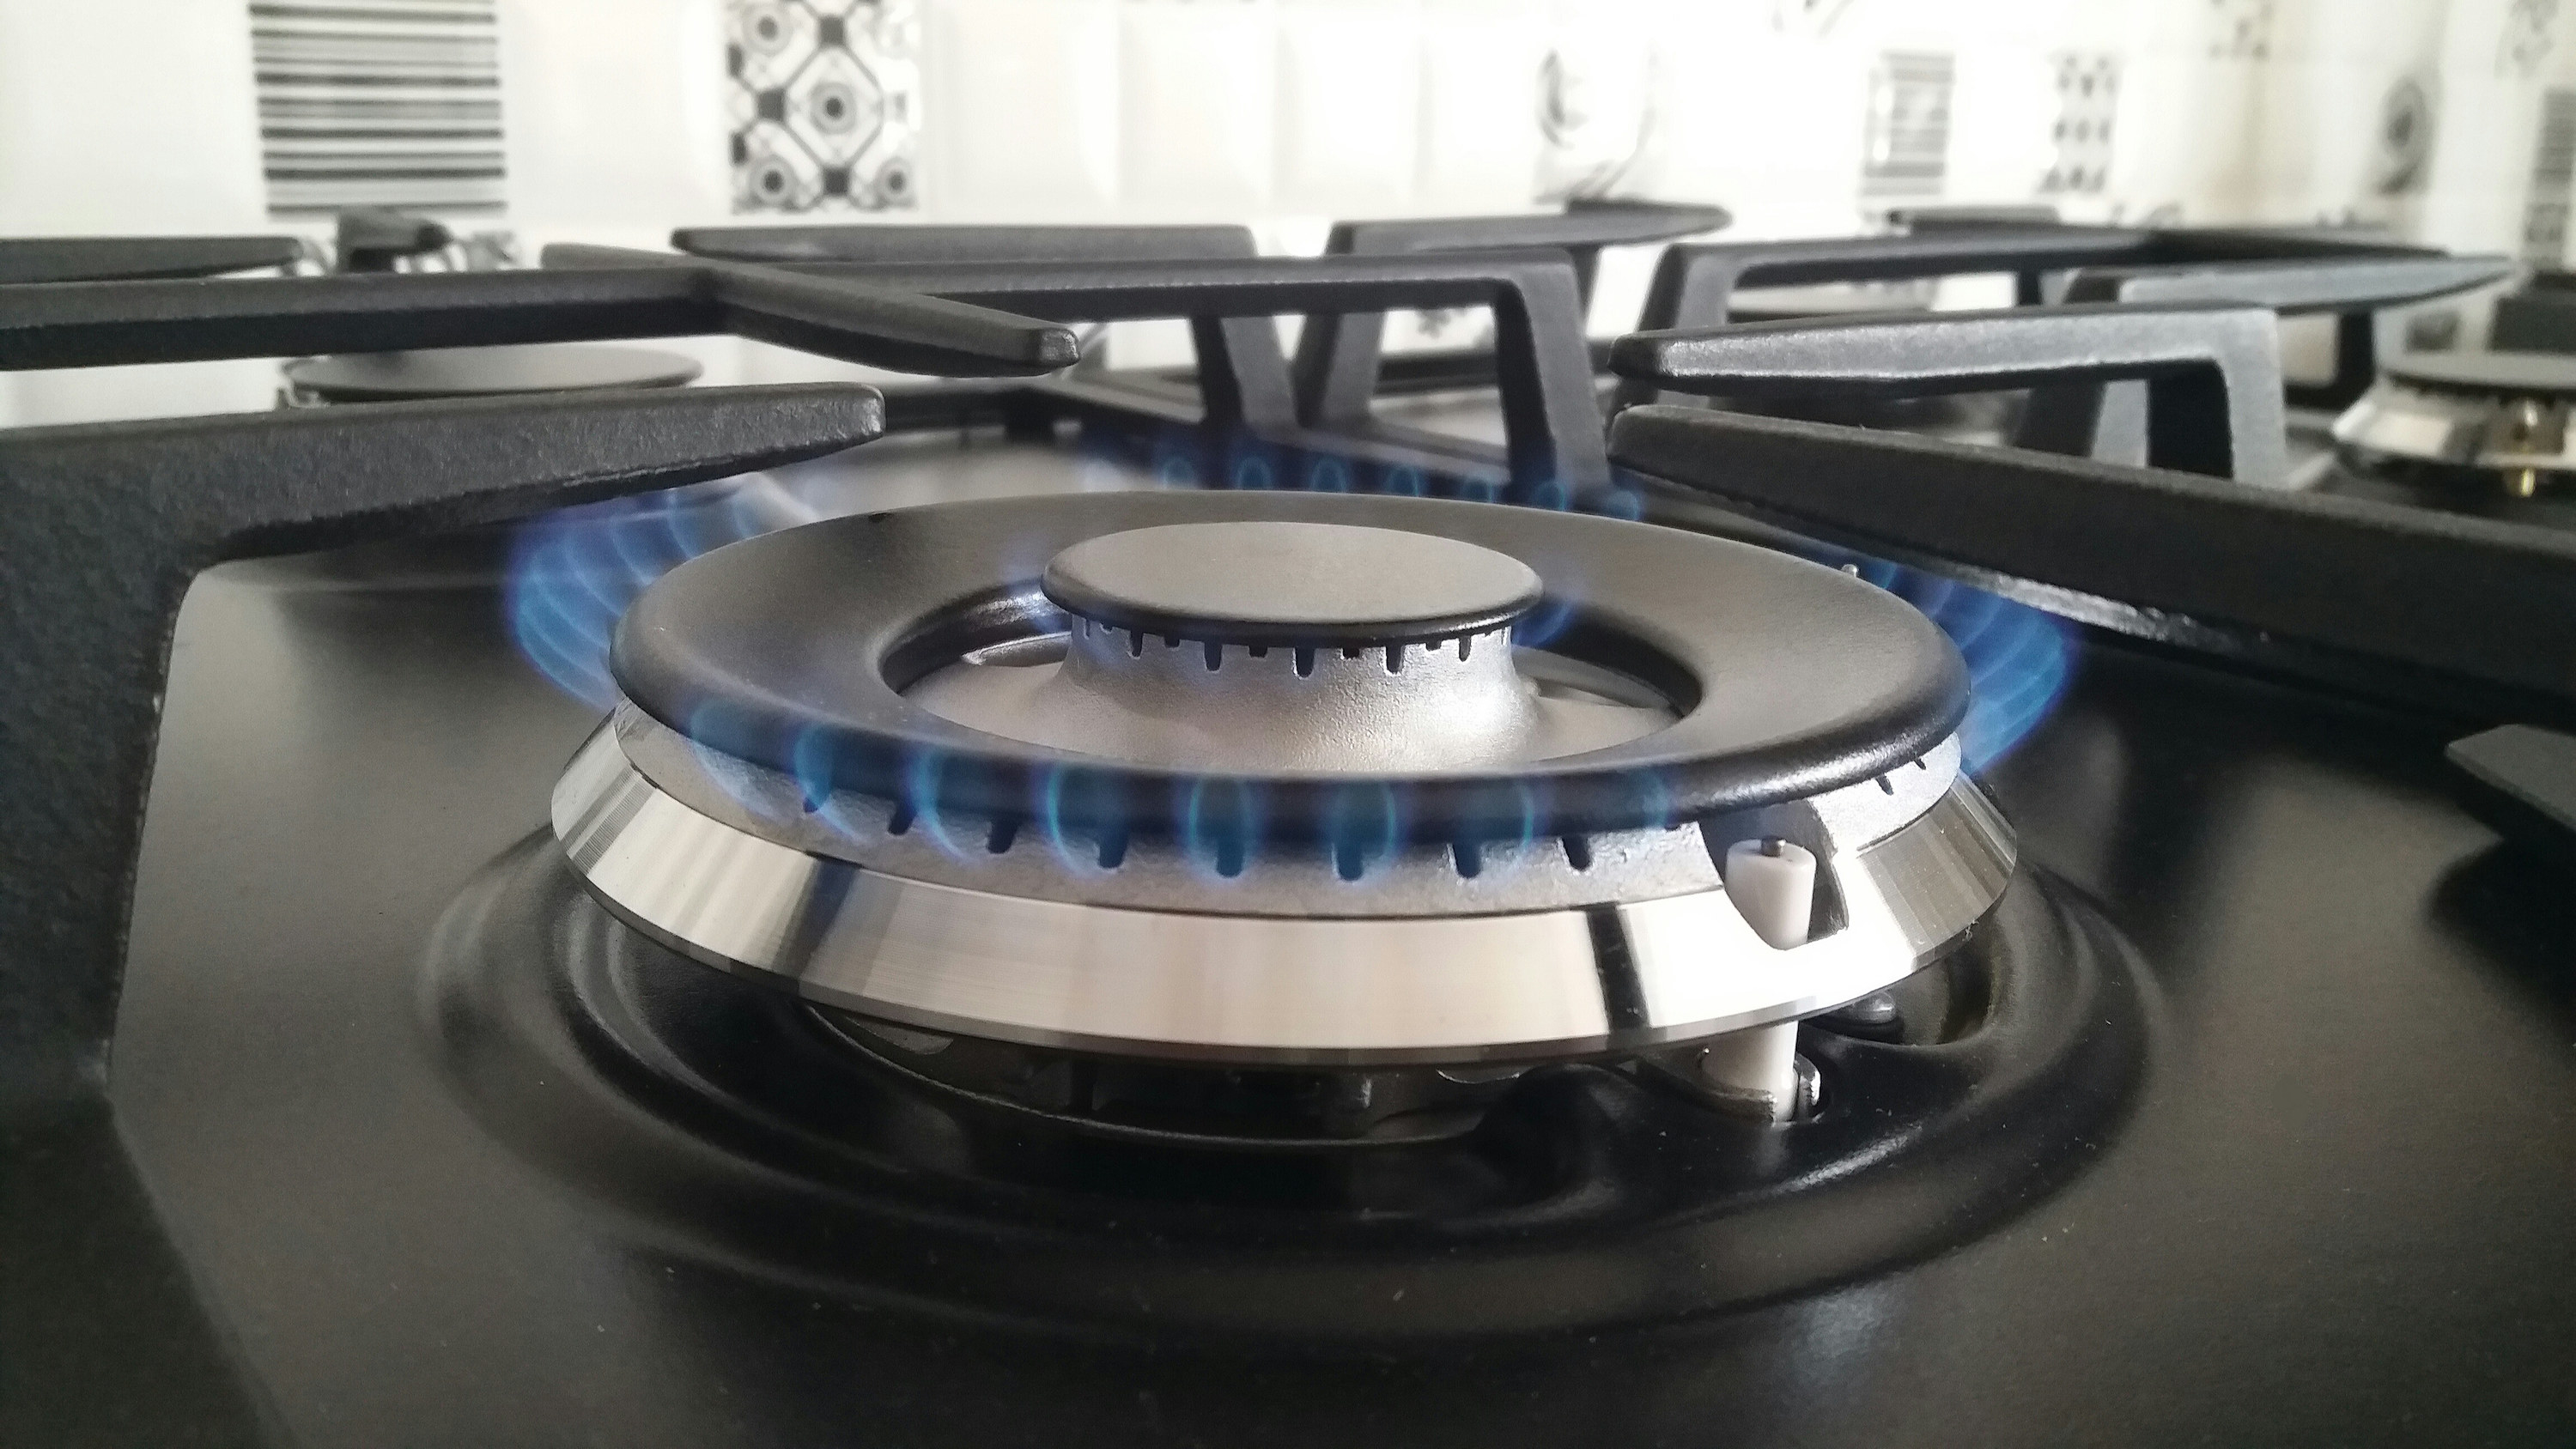 a stovetop with a gas flame